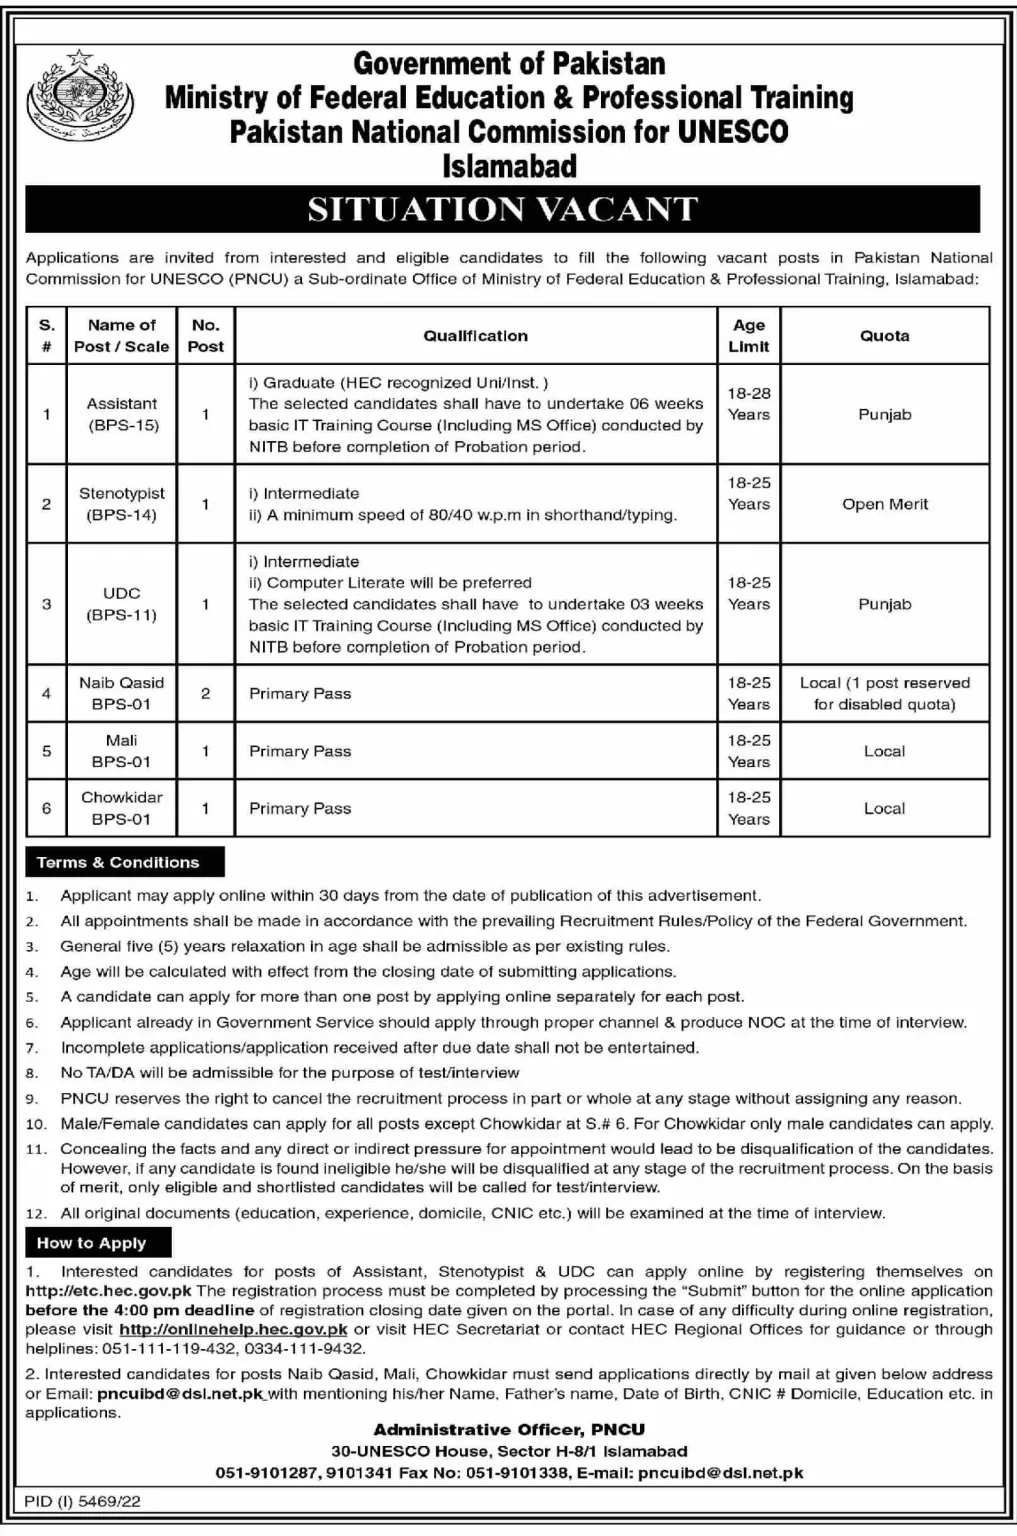 Ministry of Federal Education Jobs 2023 Islamabad - Apply Online